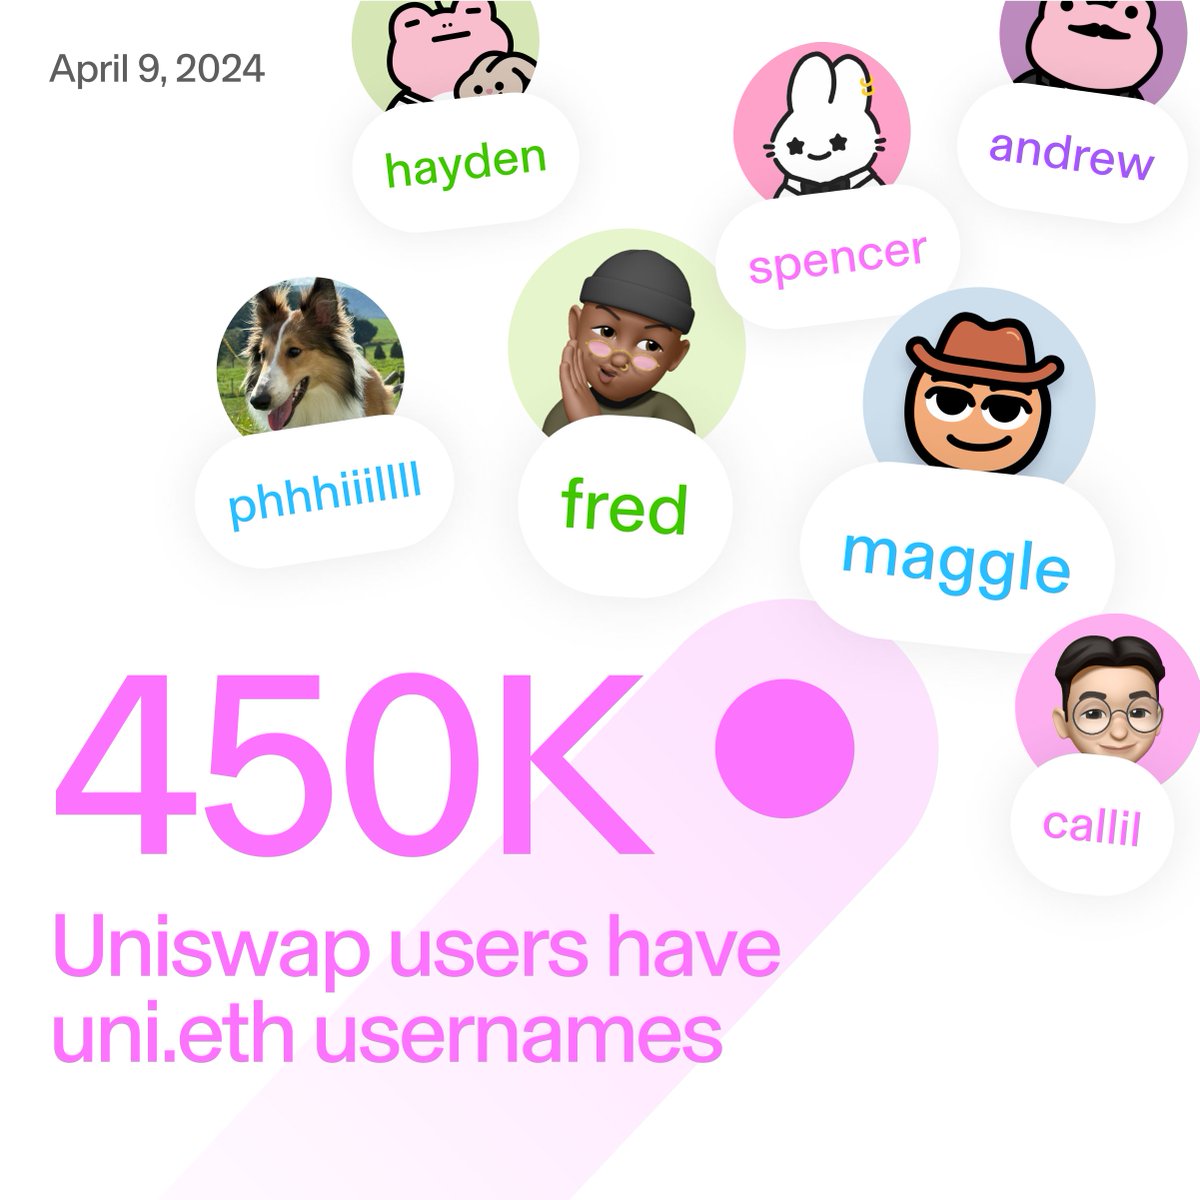 Over 400K uni.eth usernames have already been claimed Claim yours for free in the Uniswap mobile app 🦄